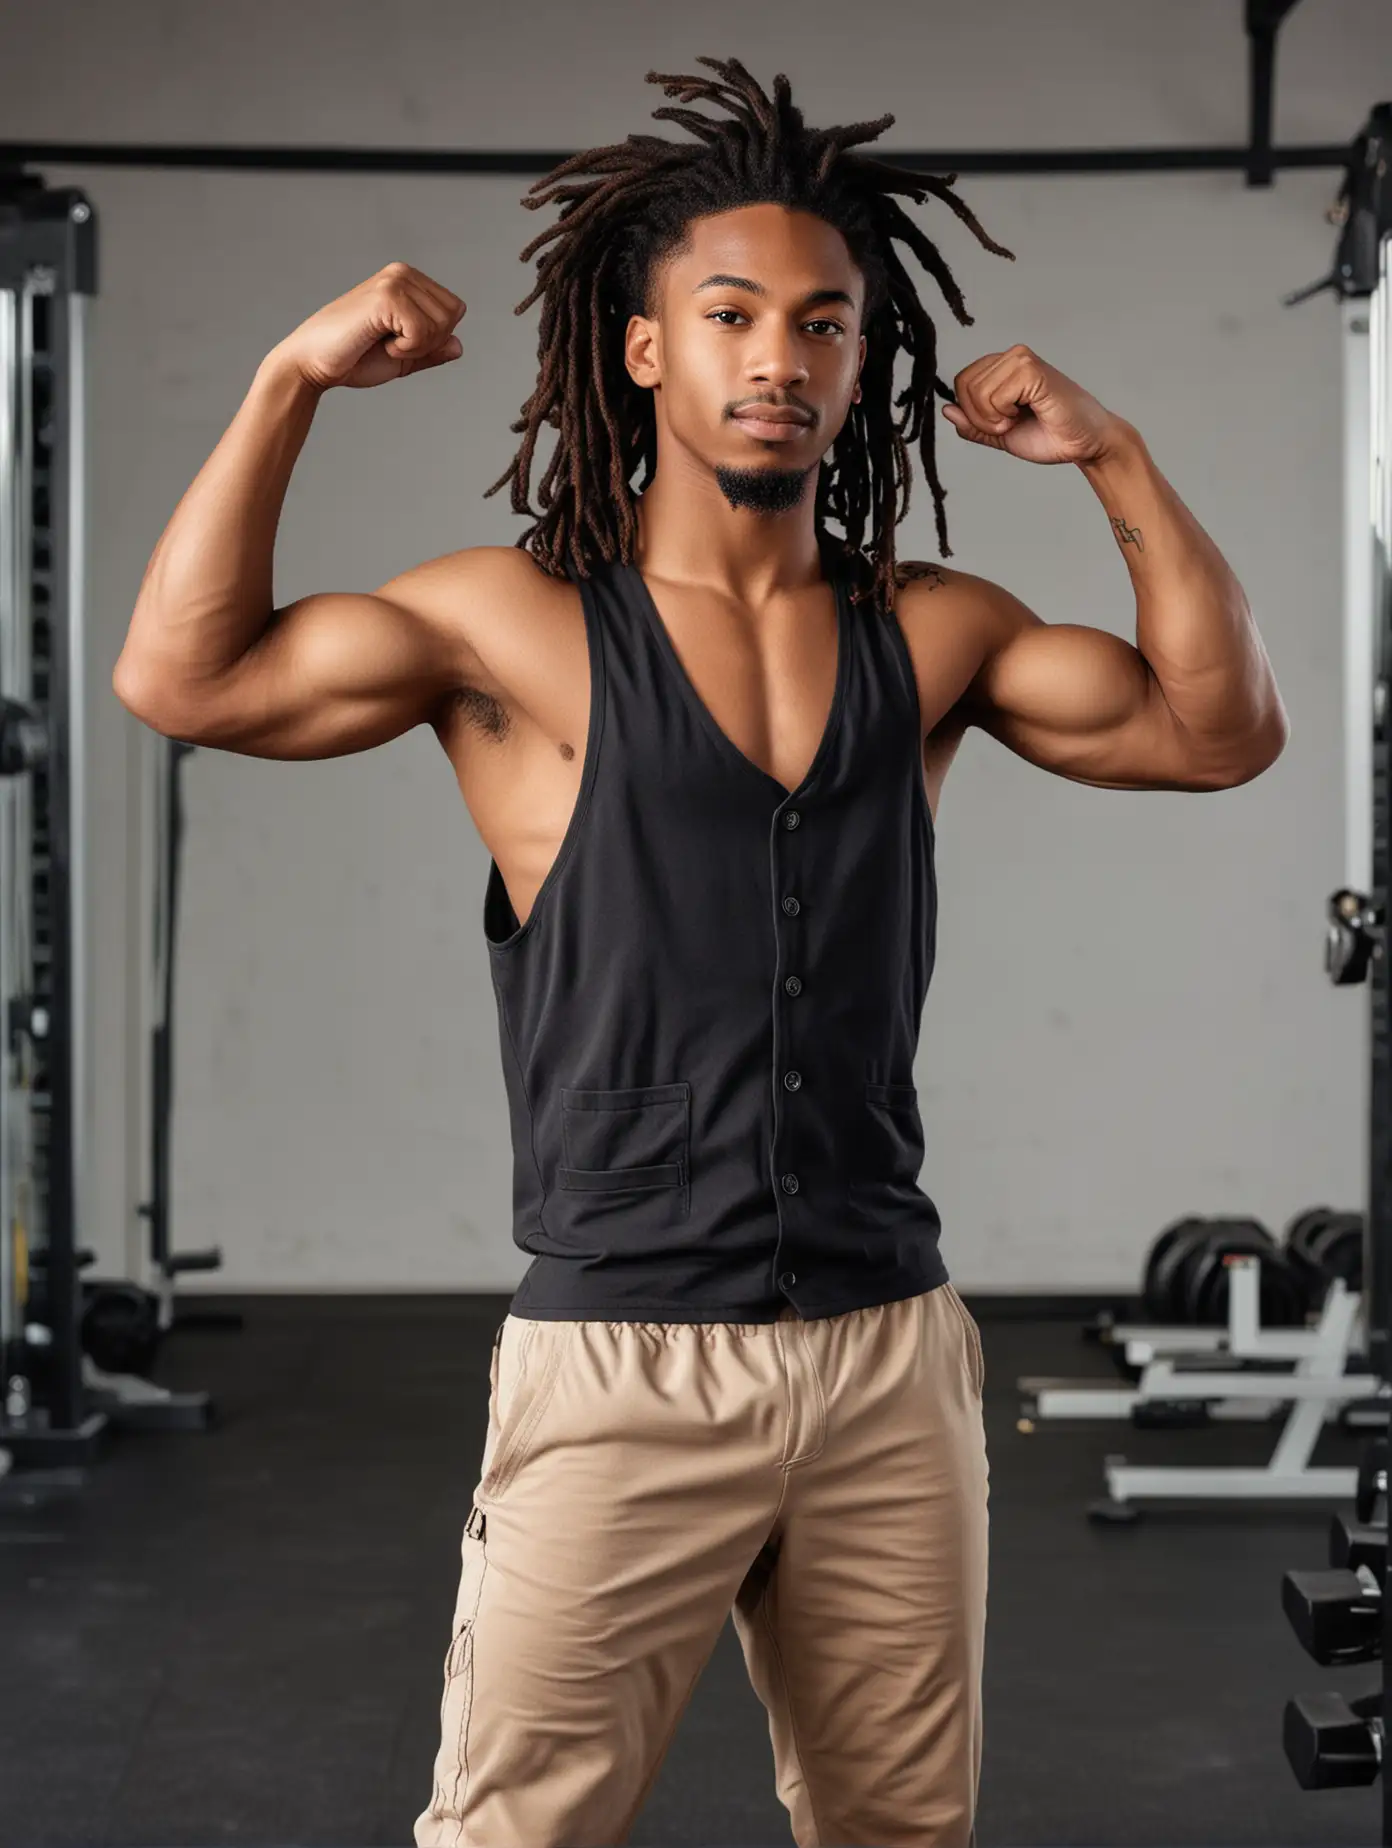 Handsome boy, African American, flexing his latissimus dorsi, saluting gesture, dreadlocks, in the gym, posing, wearing a vest, sexy figure, perfect muscles, facing the camera, professional photography technology, full body photo